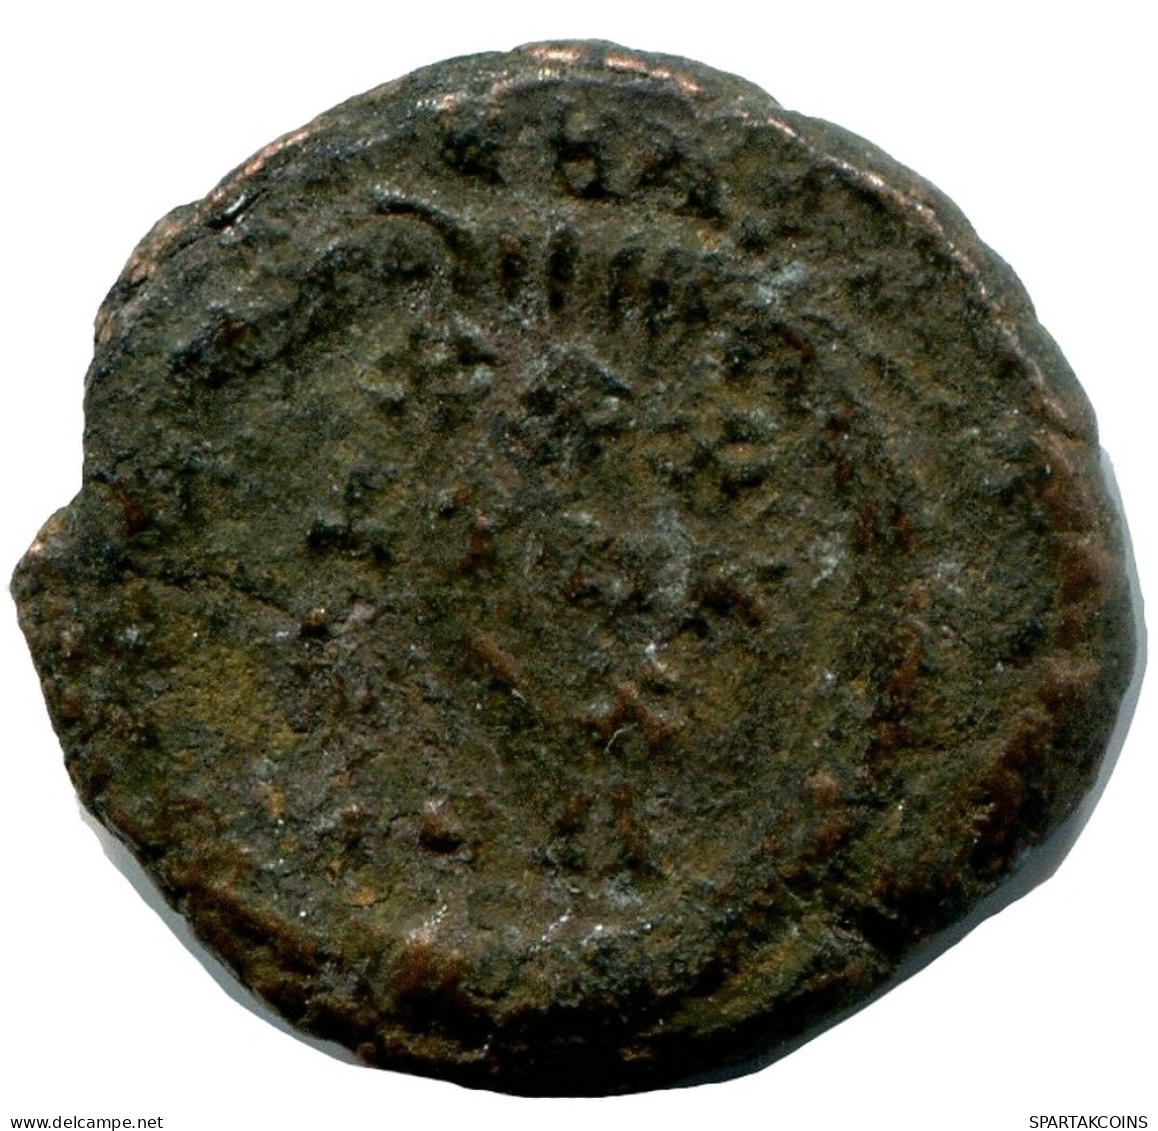 ROMAN Coin MINTED IN ALEKSANDRIA FOUND IN IHNASYAH HOARD EGYPT #ANC10152.14.D.A - The Christian Empire (307 AD To 363 AD)